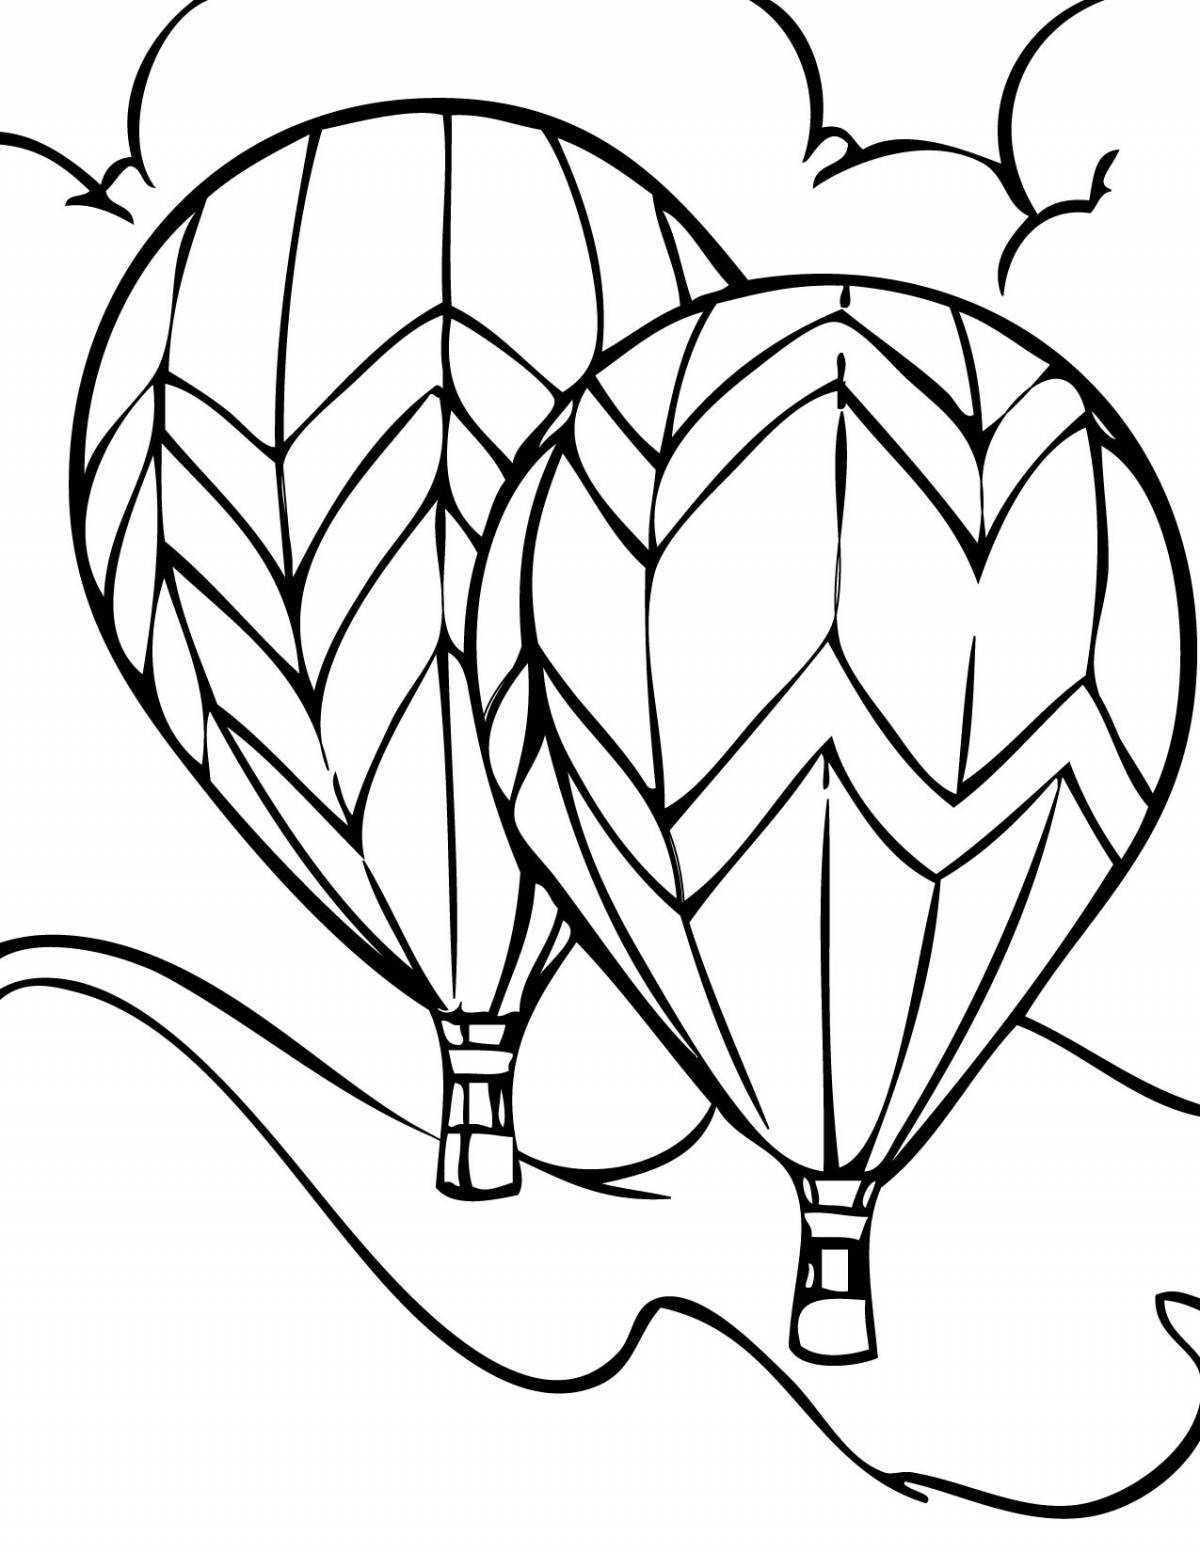 Glitter ball coloring page